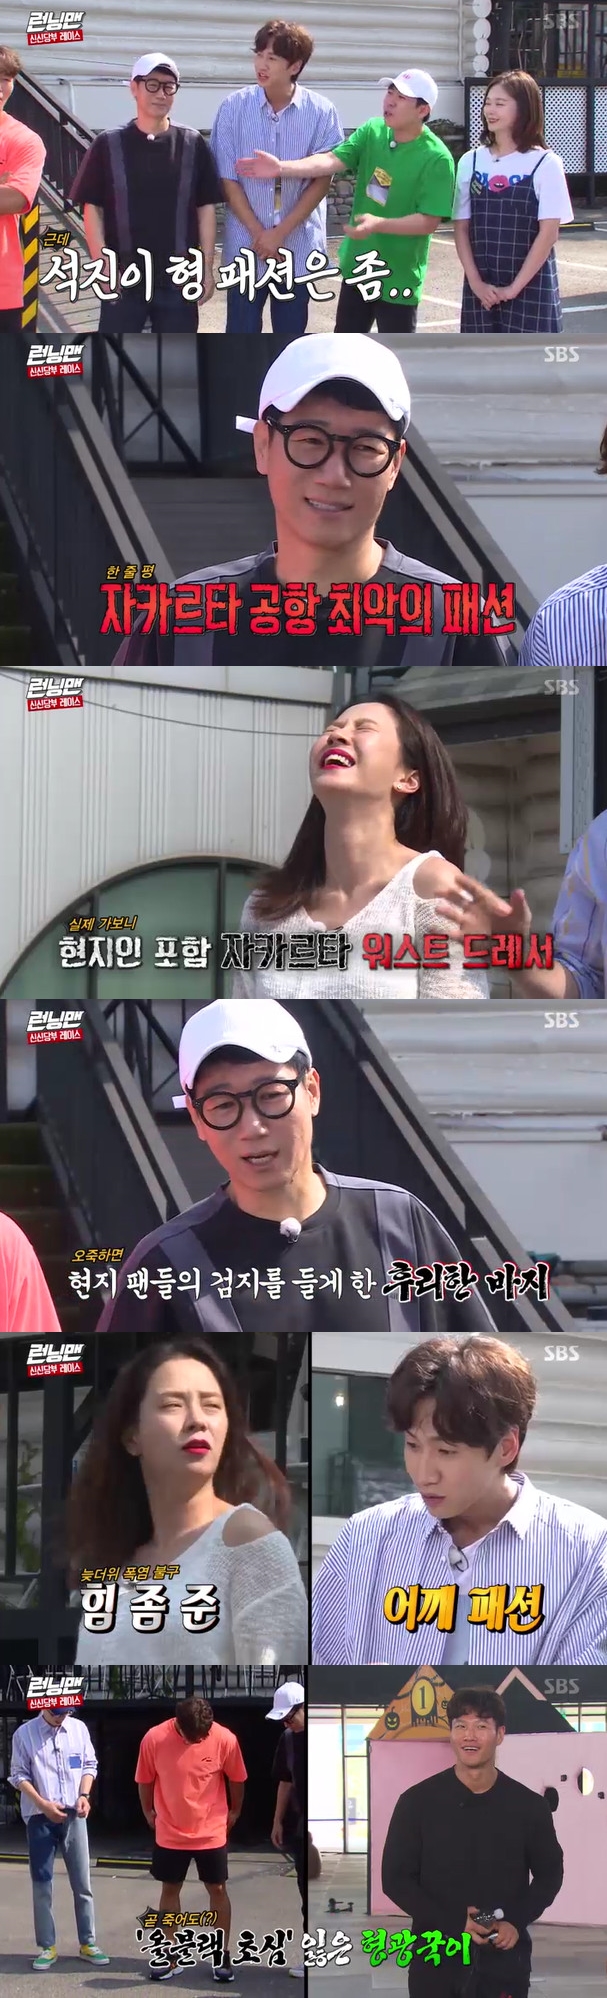 Members of Running Man shared their story after the 9th anniversary fan meeting.On SBS Running Man, which was broadcast on September 1, there was a place to discuss the fashion of the members.On this day, the members paid attention to the Song Ji-hyo off-shoulder fashion that gave strength to one shoulder.In particular, Lee Kwang-soo looked at Song Ji-hyos shoulder and laughed, saying, Ive seen the burning country for a long time.Yoo Jae-Suk then said, You lost a little bit of an initial mind when Kim Jong-kook in fluorescent costume appeared.Kim Jong-kook was embarrassed and explained, This is a stylist working, and Yang Se-chan said, I can not get a traffic accident.On the other hand, Yoo Jae-Suk recently mentioned that Running Man Airport fashion has become a hot topic, and said, The end has a nickname.Its Kim Chi-chi, he said, talking about Kim Jong-kooks exposure accident (?), which once again embarrassed Kim Jong-kook.The highlight was Ji Suk-jin; the members gave a hot applause, reminding them of the Ji Suk-jin Airport fashion.At the time, Ji Suk-jin surprised everyone with a front-looking look.Yoo Jae-Suk emphasized that Jakarta Airport is the worst fashion and the members also felt the storm saying I promise.In particular, Lee Kwang-soo said, The fans also pointed at their pants.bak-beauty